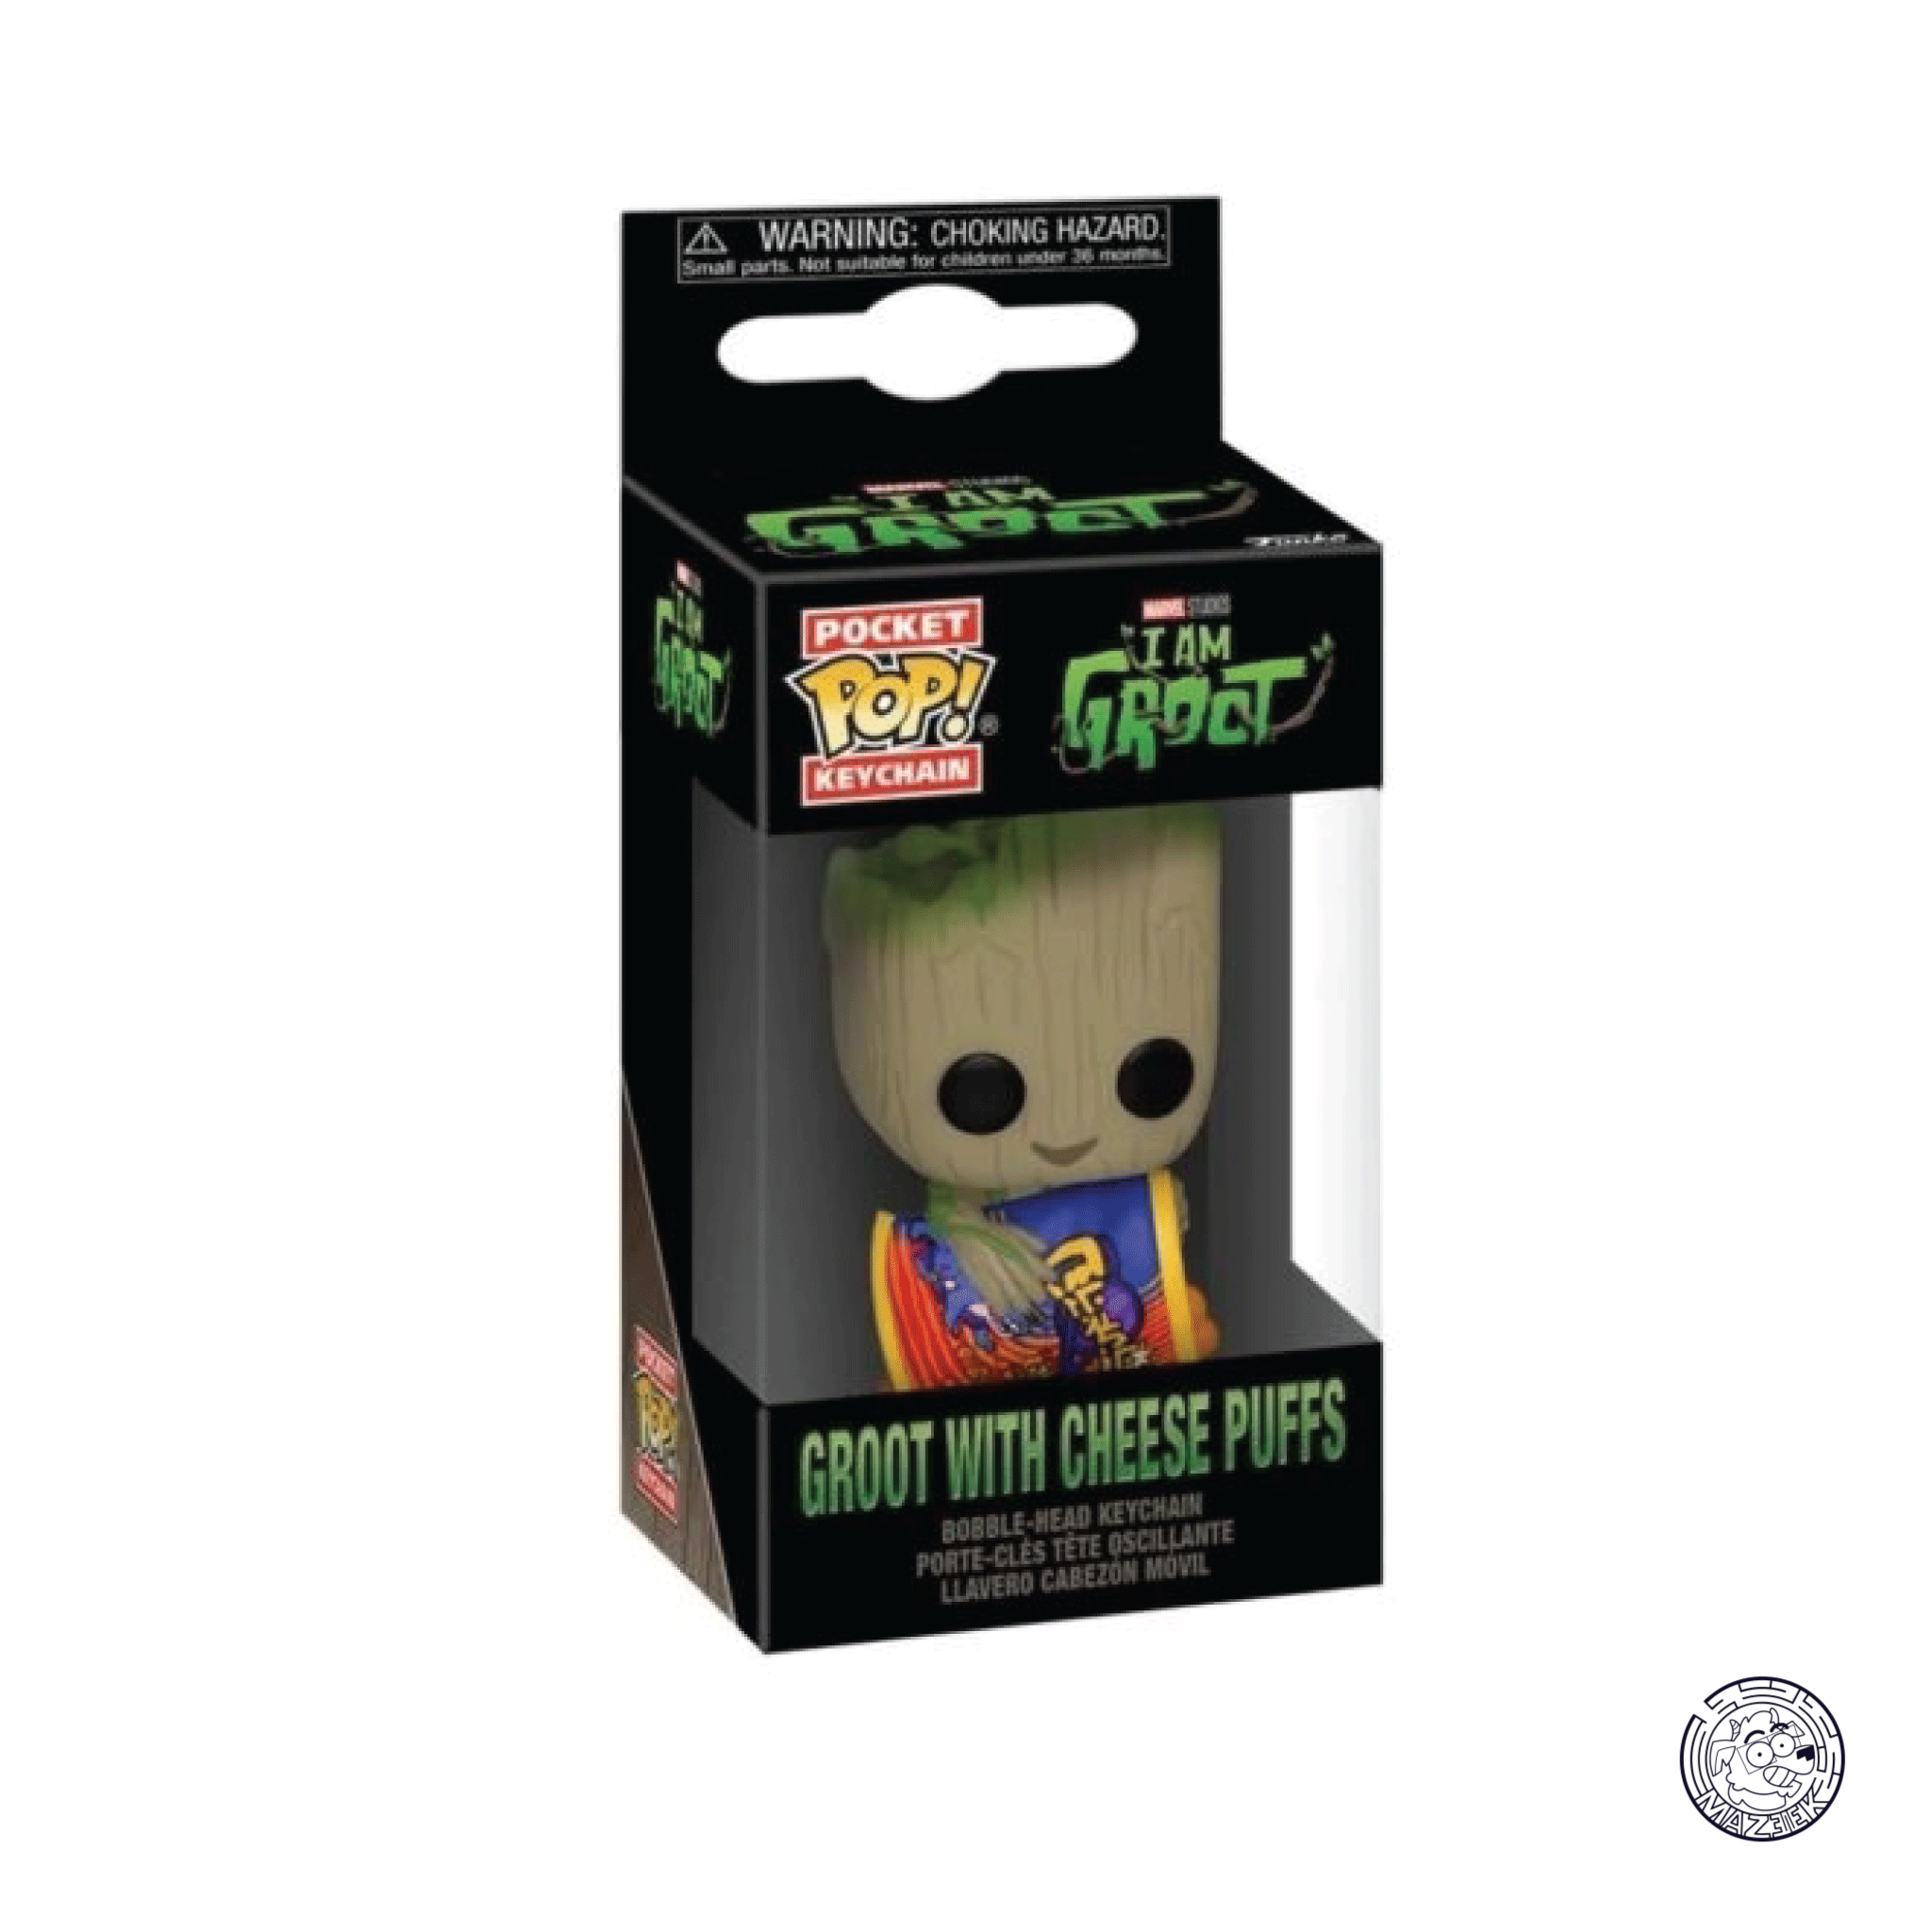 Pocket POP! Marvel Keychain - I Am Groot: Groot with Cheese Puffs